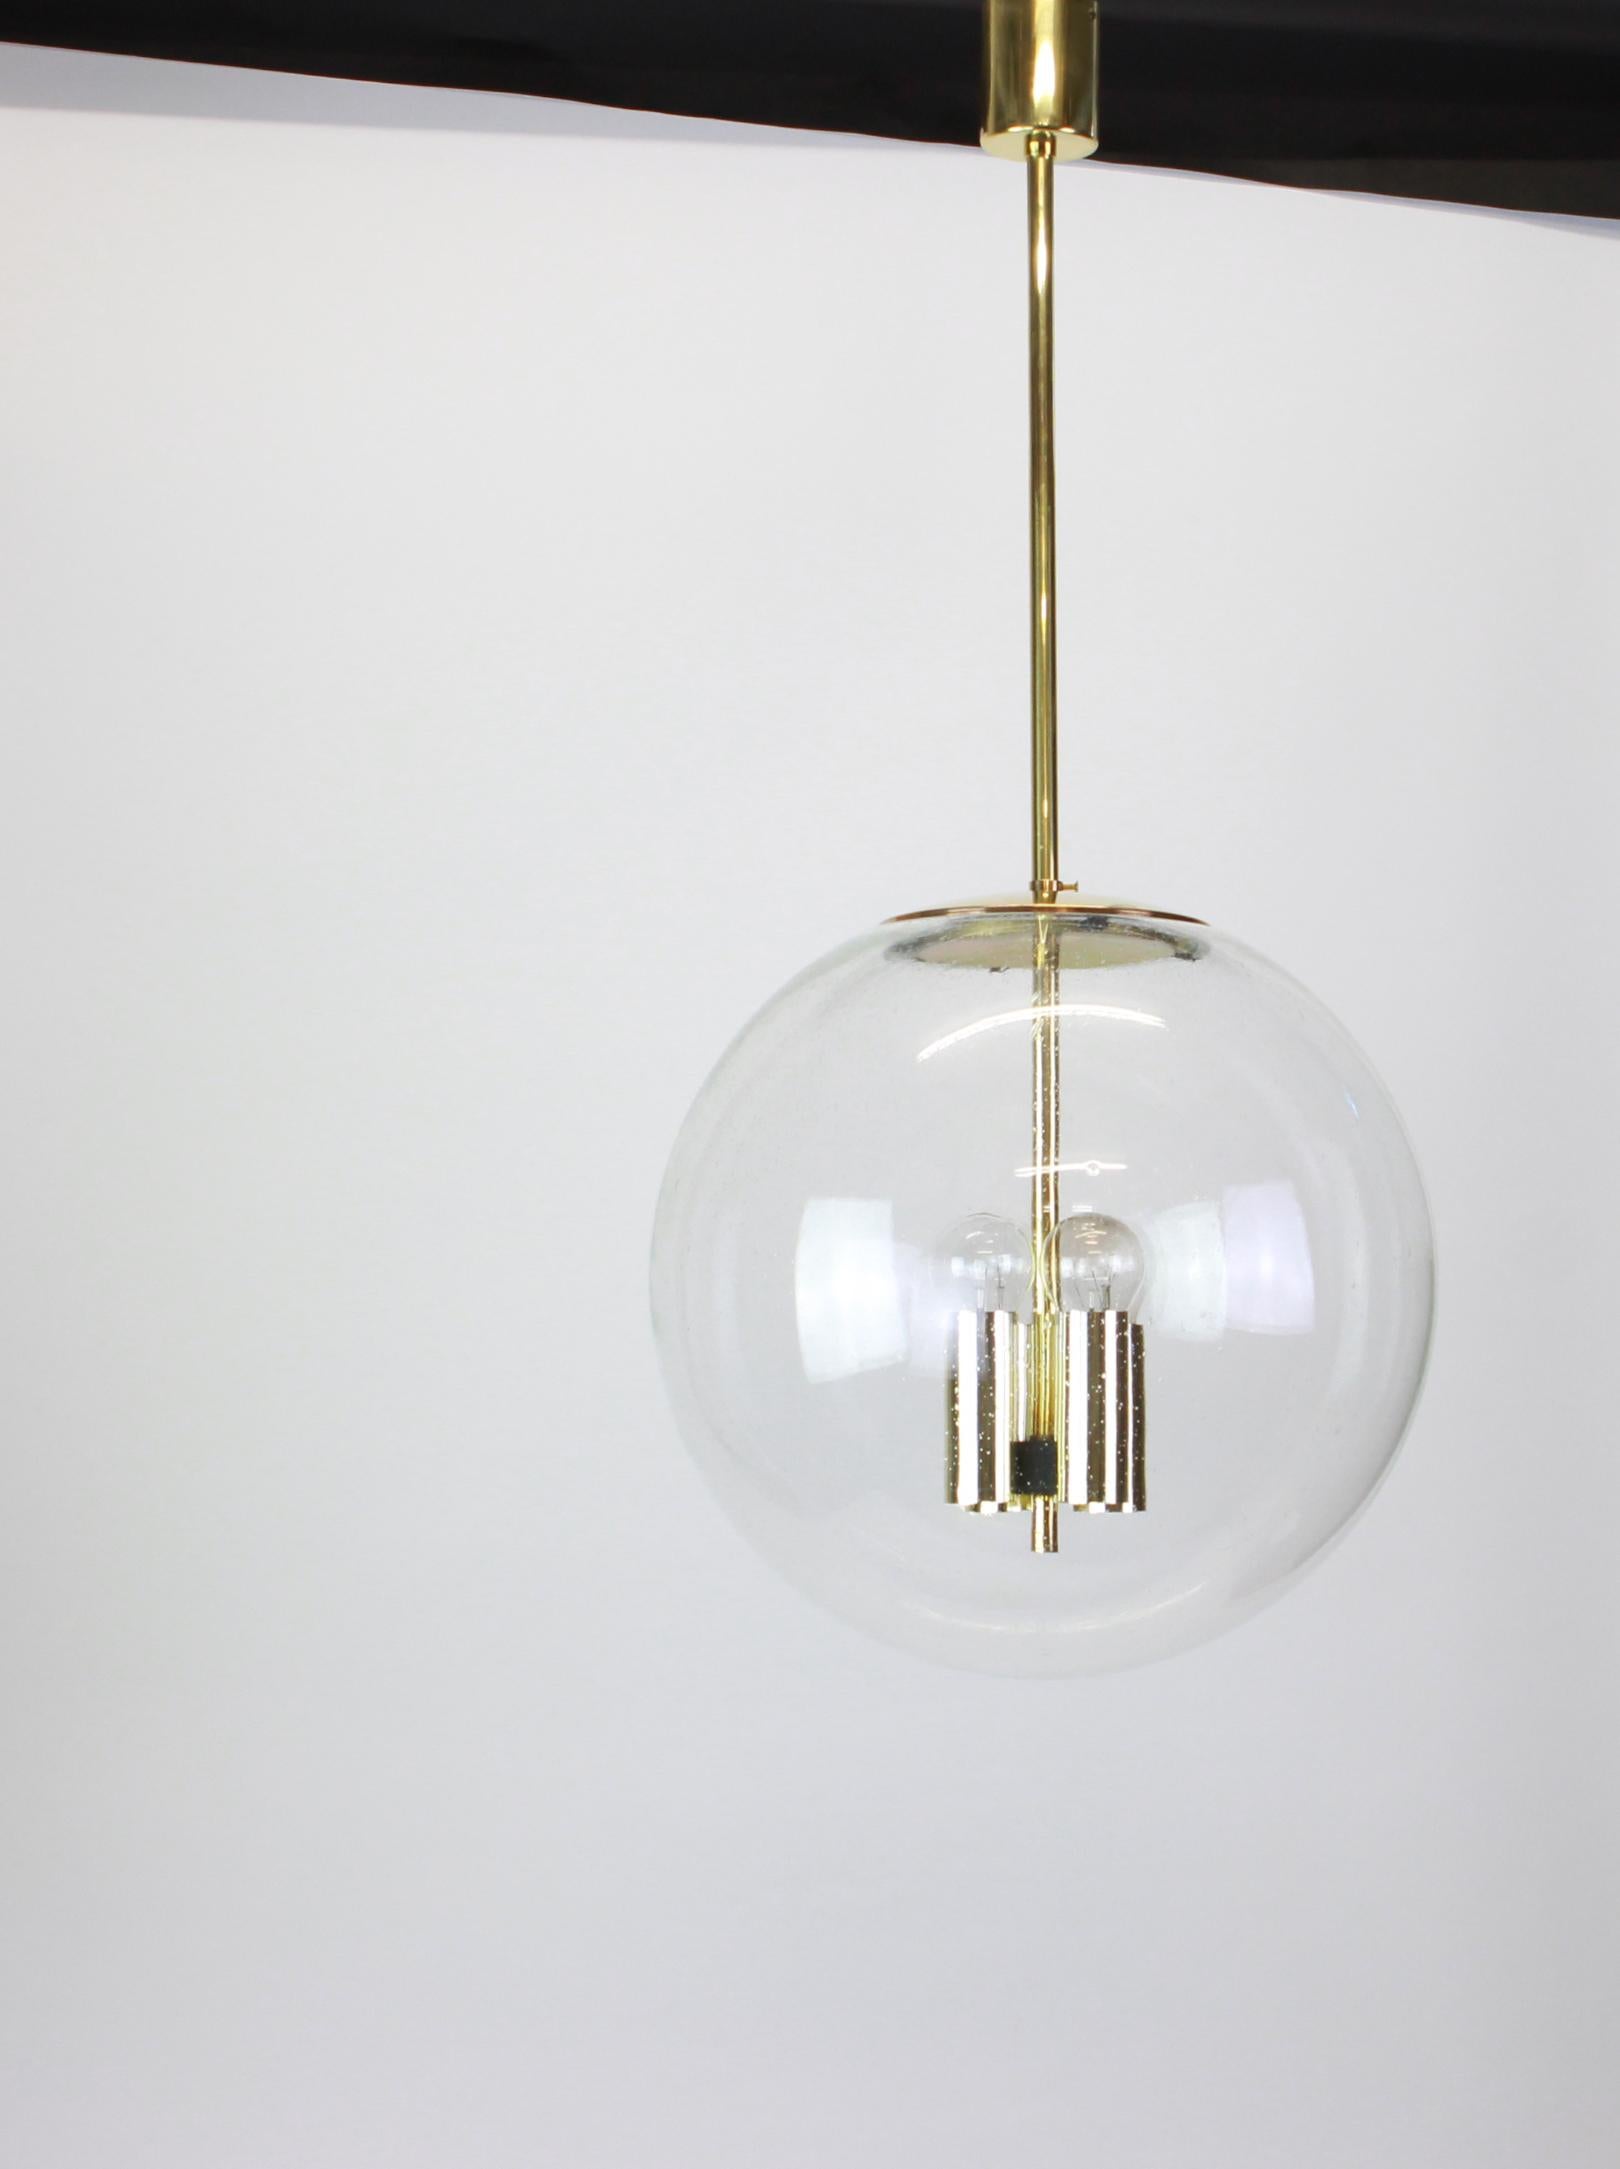 Large mouth-blown glass ball pendant, manufactured by Limburg, Germany, circa 1970-1979.

Sockets: 4 x E27 standard bulb and function on a voltage from 110 till 240 volts. (For USA, UK, etc).
Drop rod can be adjusted as required, free of charge,